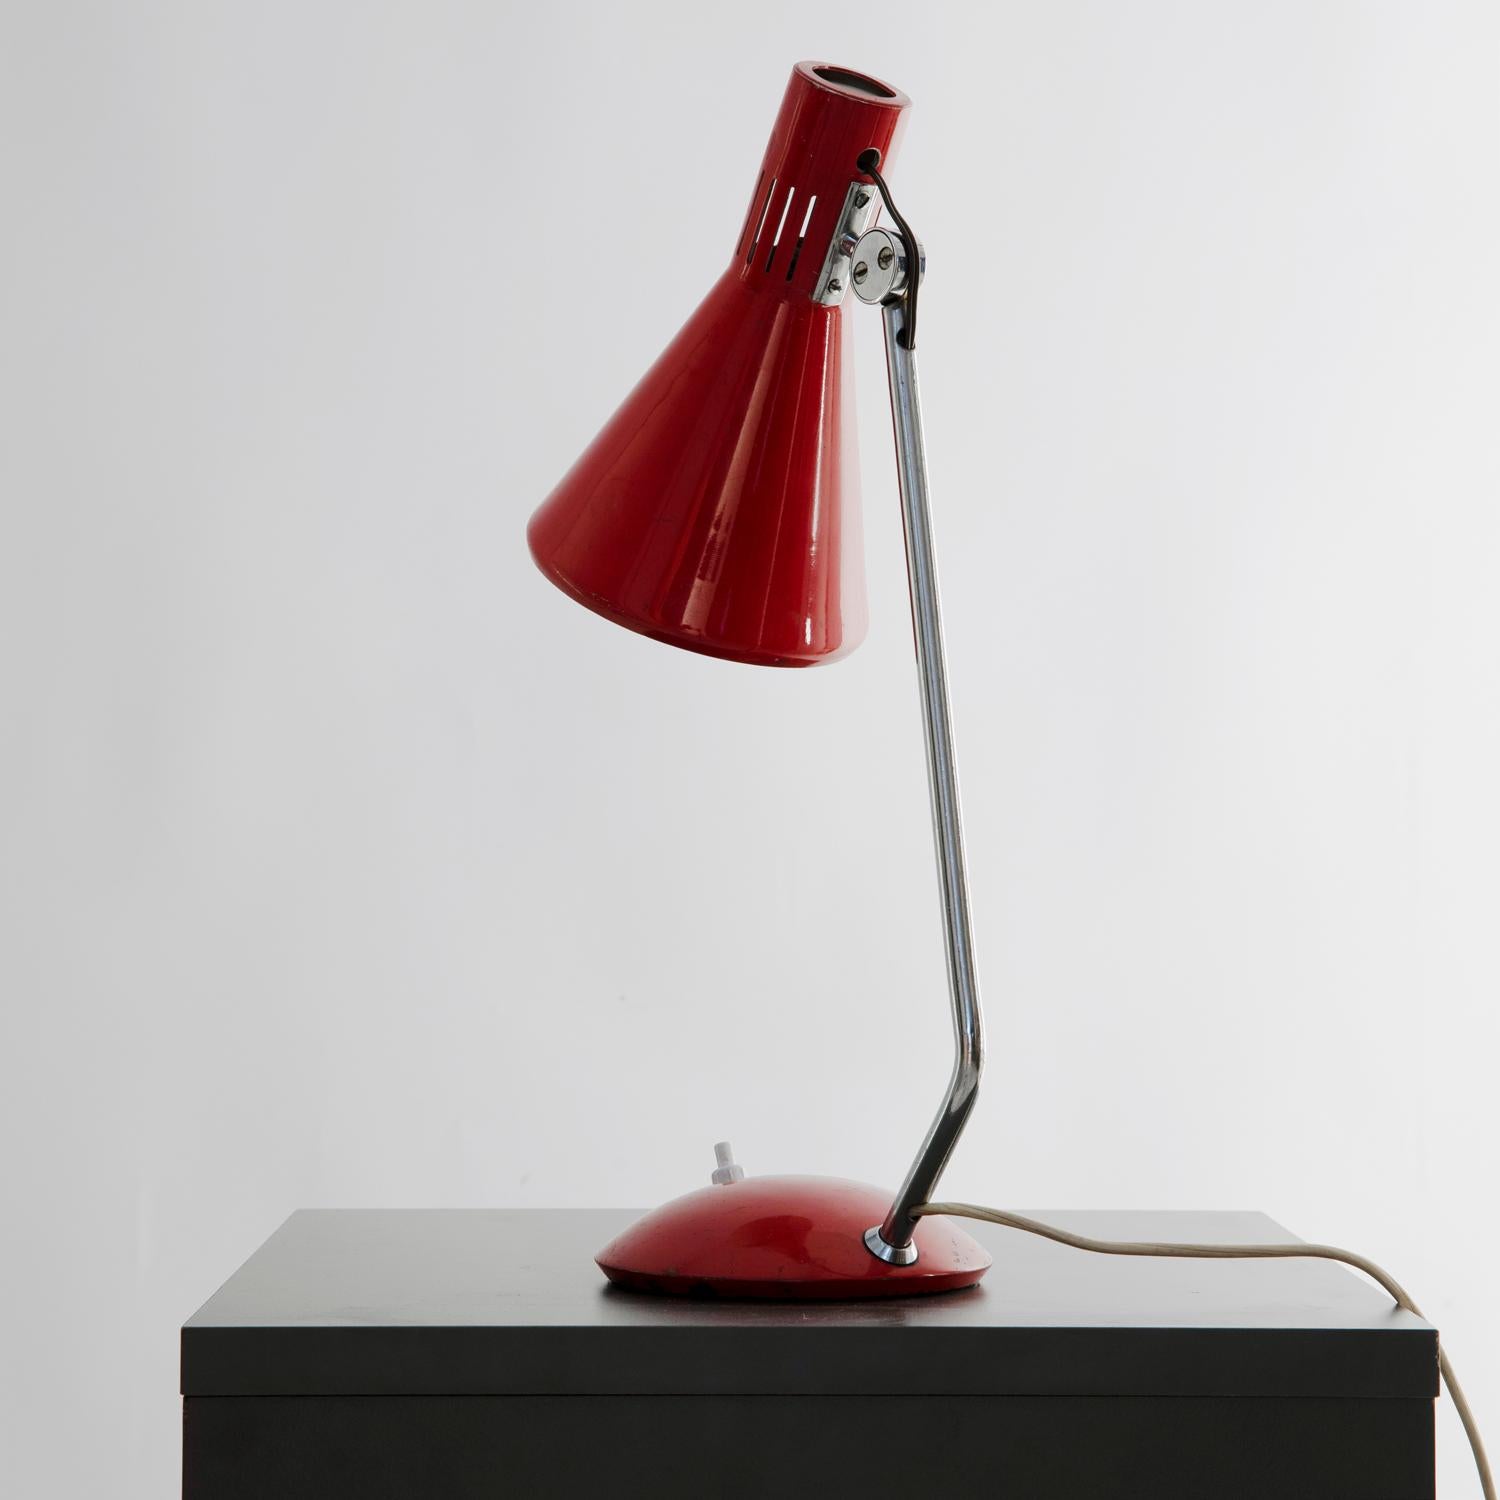 Adjustable desk lamp mod. 8042 from the 1959 manufactured by Stilnovo, original red painting and mint condition chrome structure. Original label and marked on the structure.